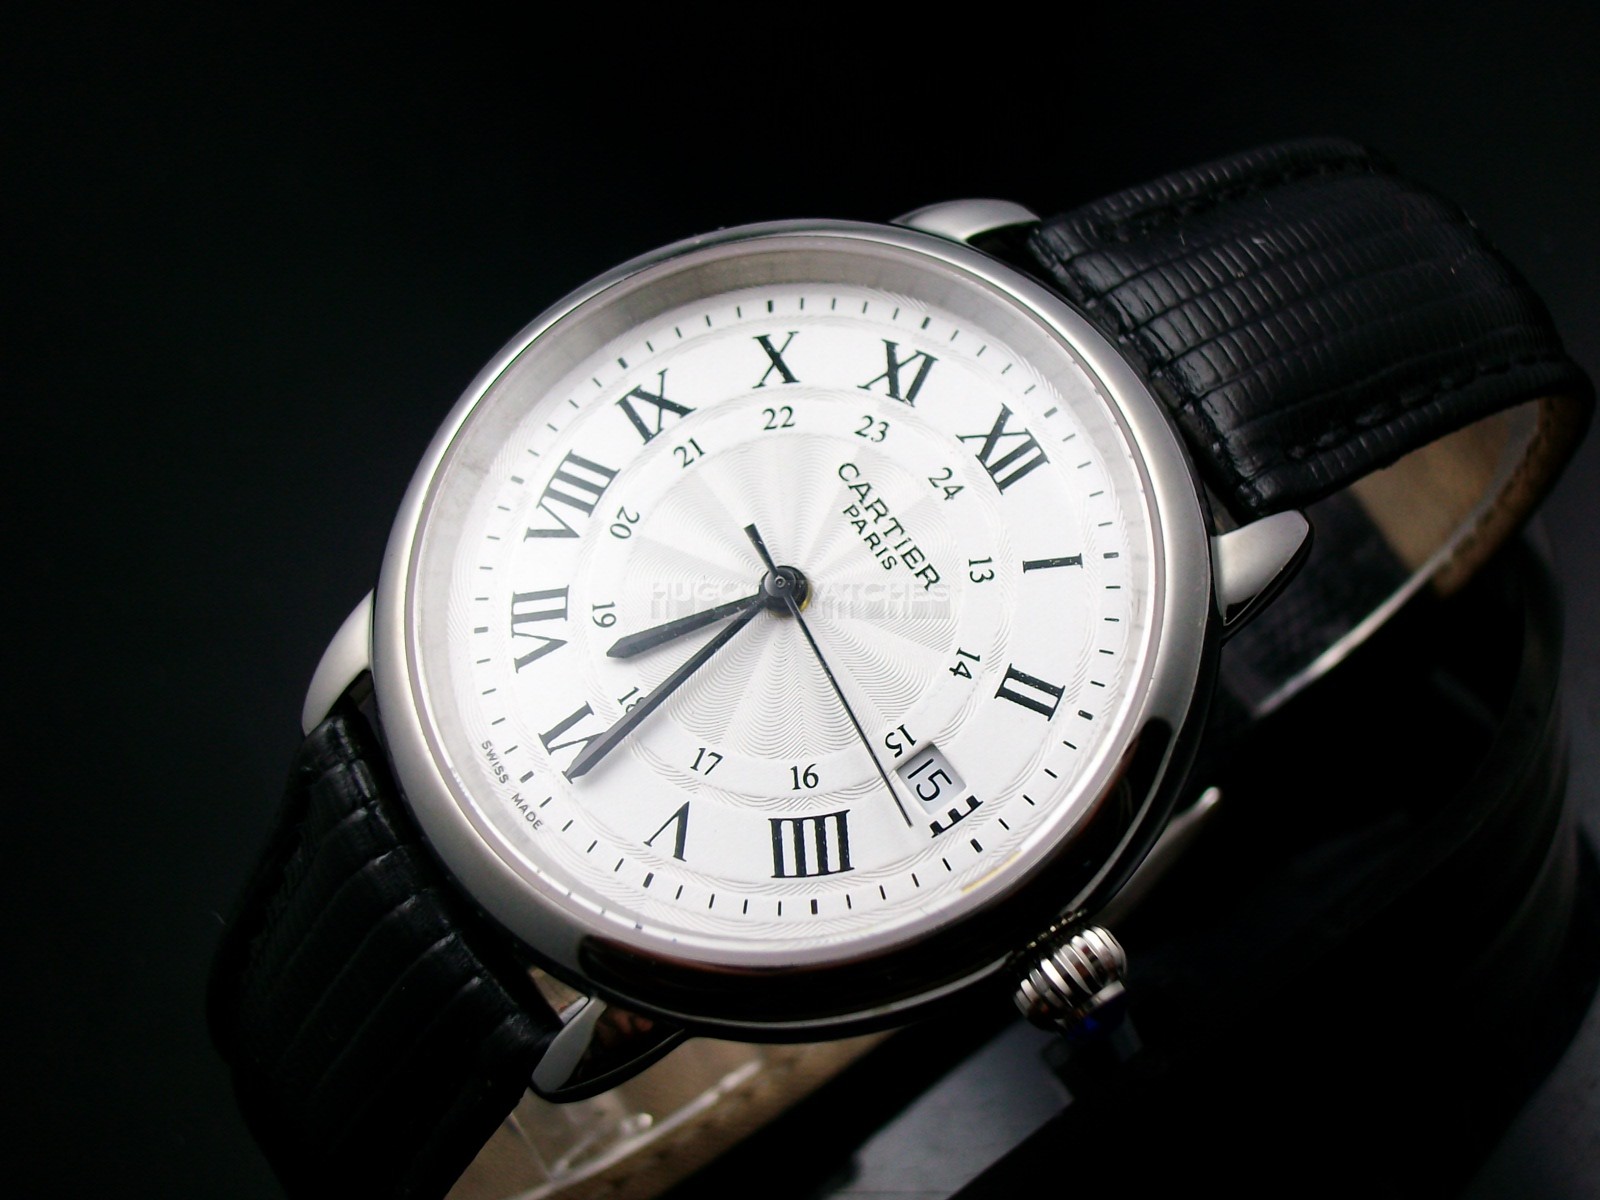 Cartier Ronde Solo Swiss 2824 Automatic Watch White Dial Black leather Strap